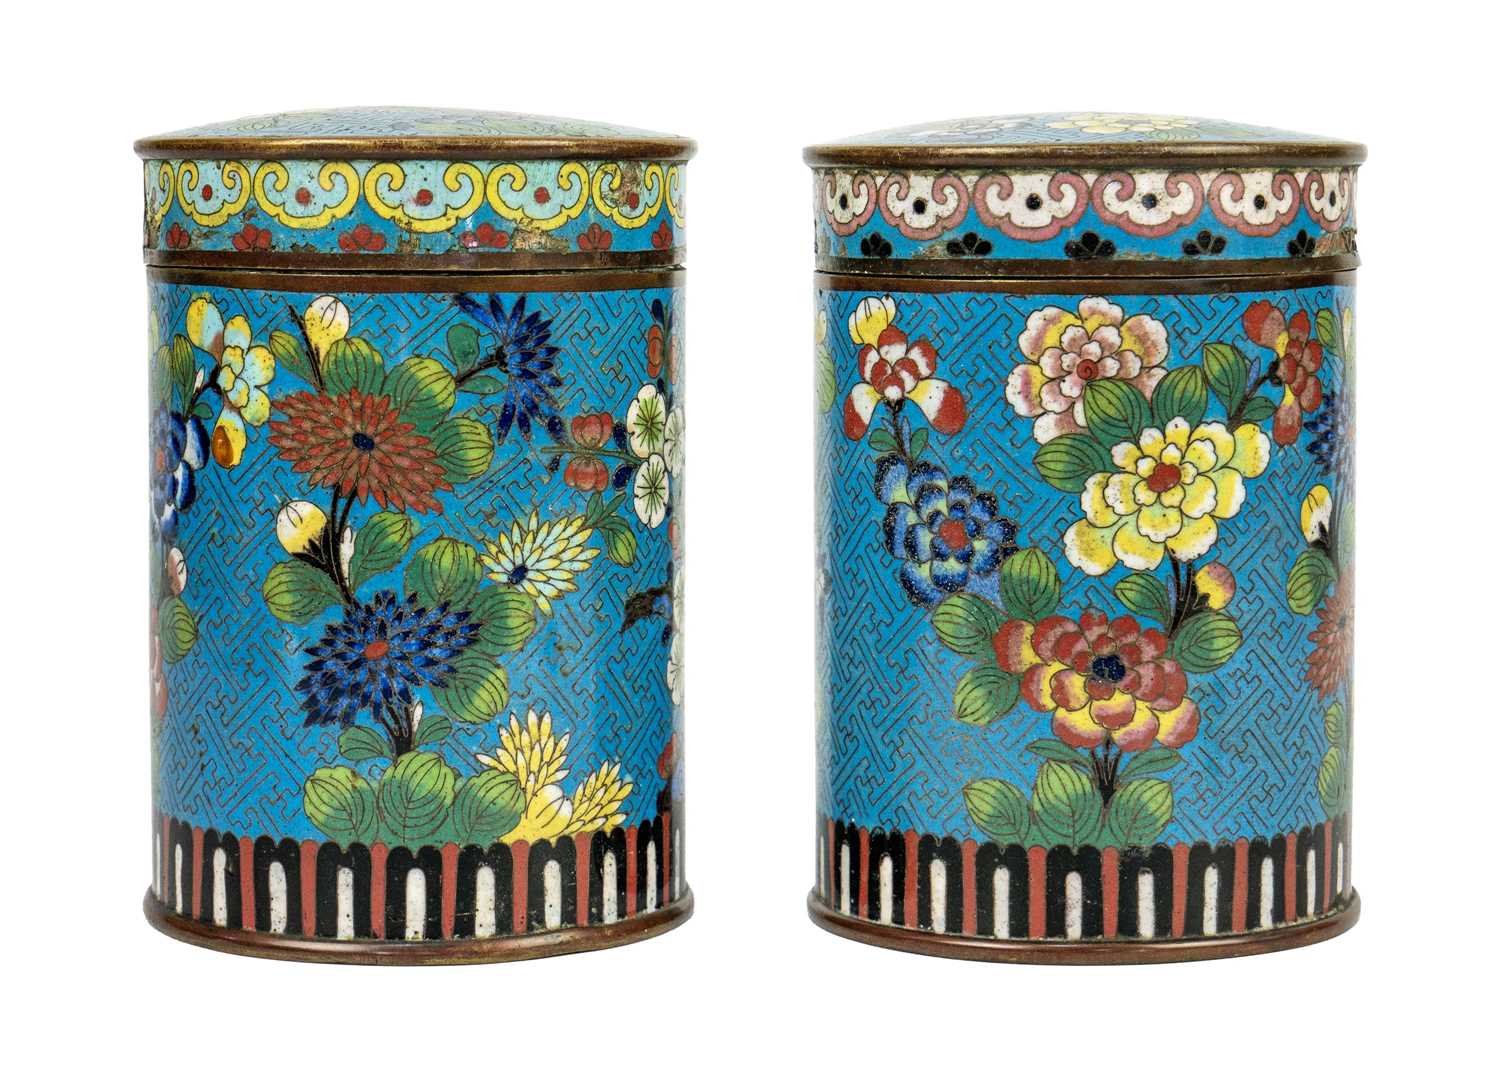 A pair of Chinese cloisonne cylindrical jars and covers, early 19th century.